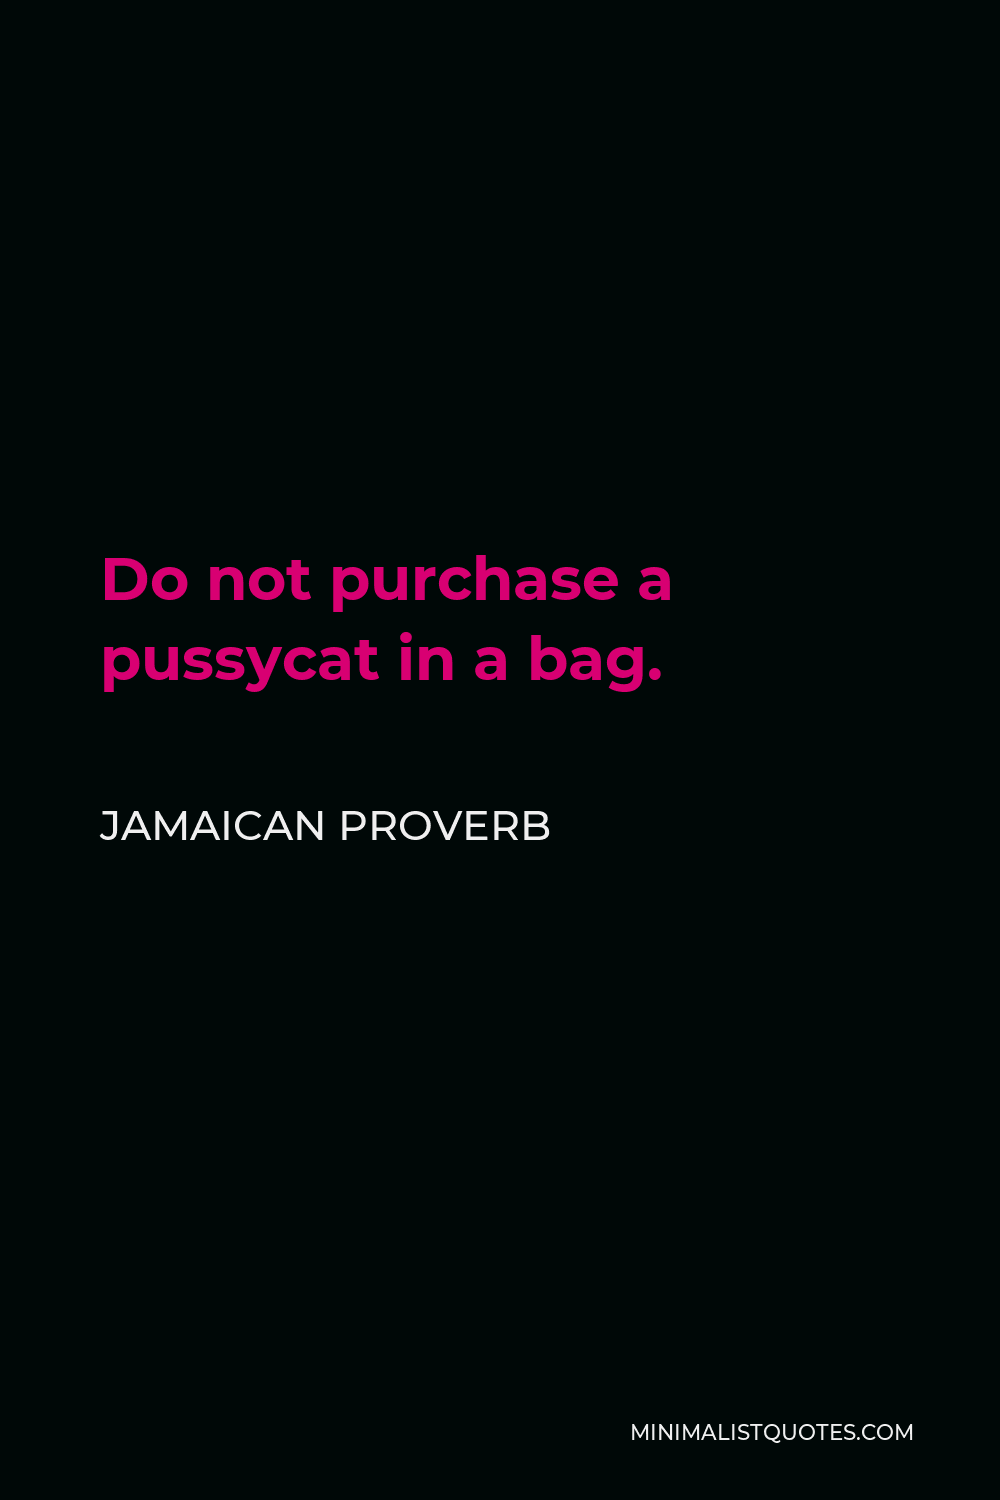 Jamaican Proverb Quote - Do not purchase a pussycat in a bag.